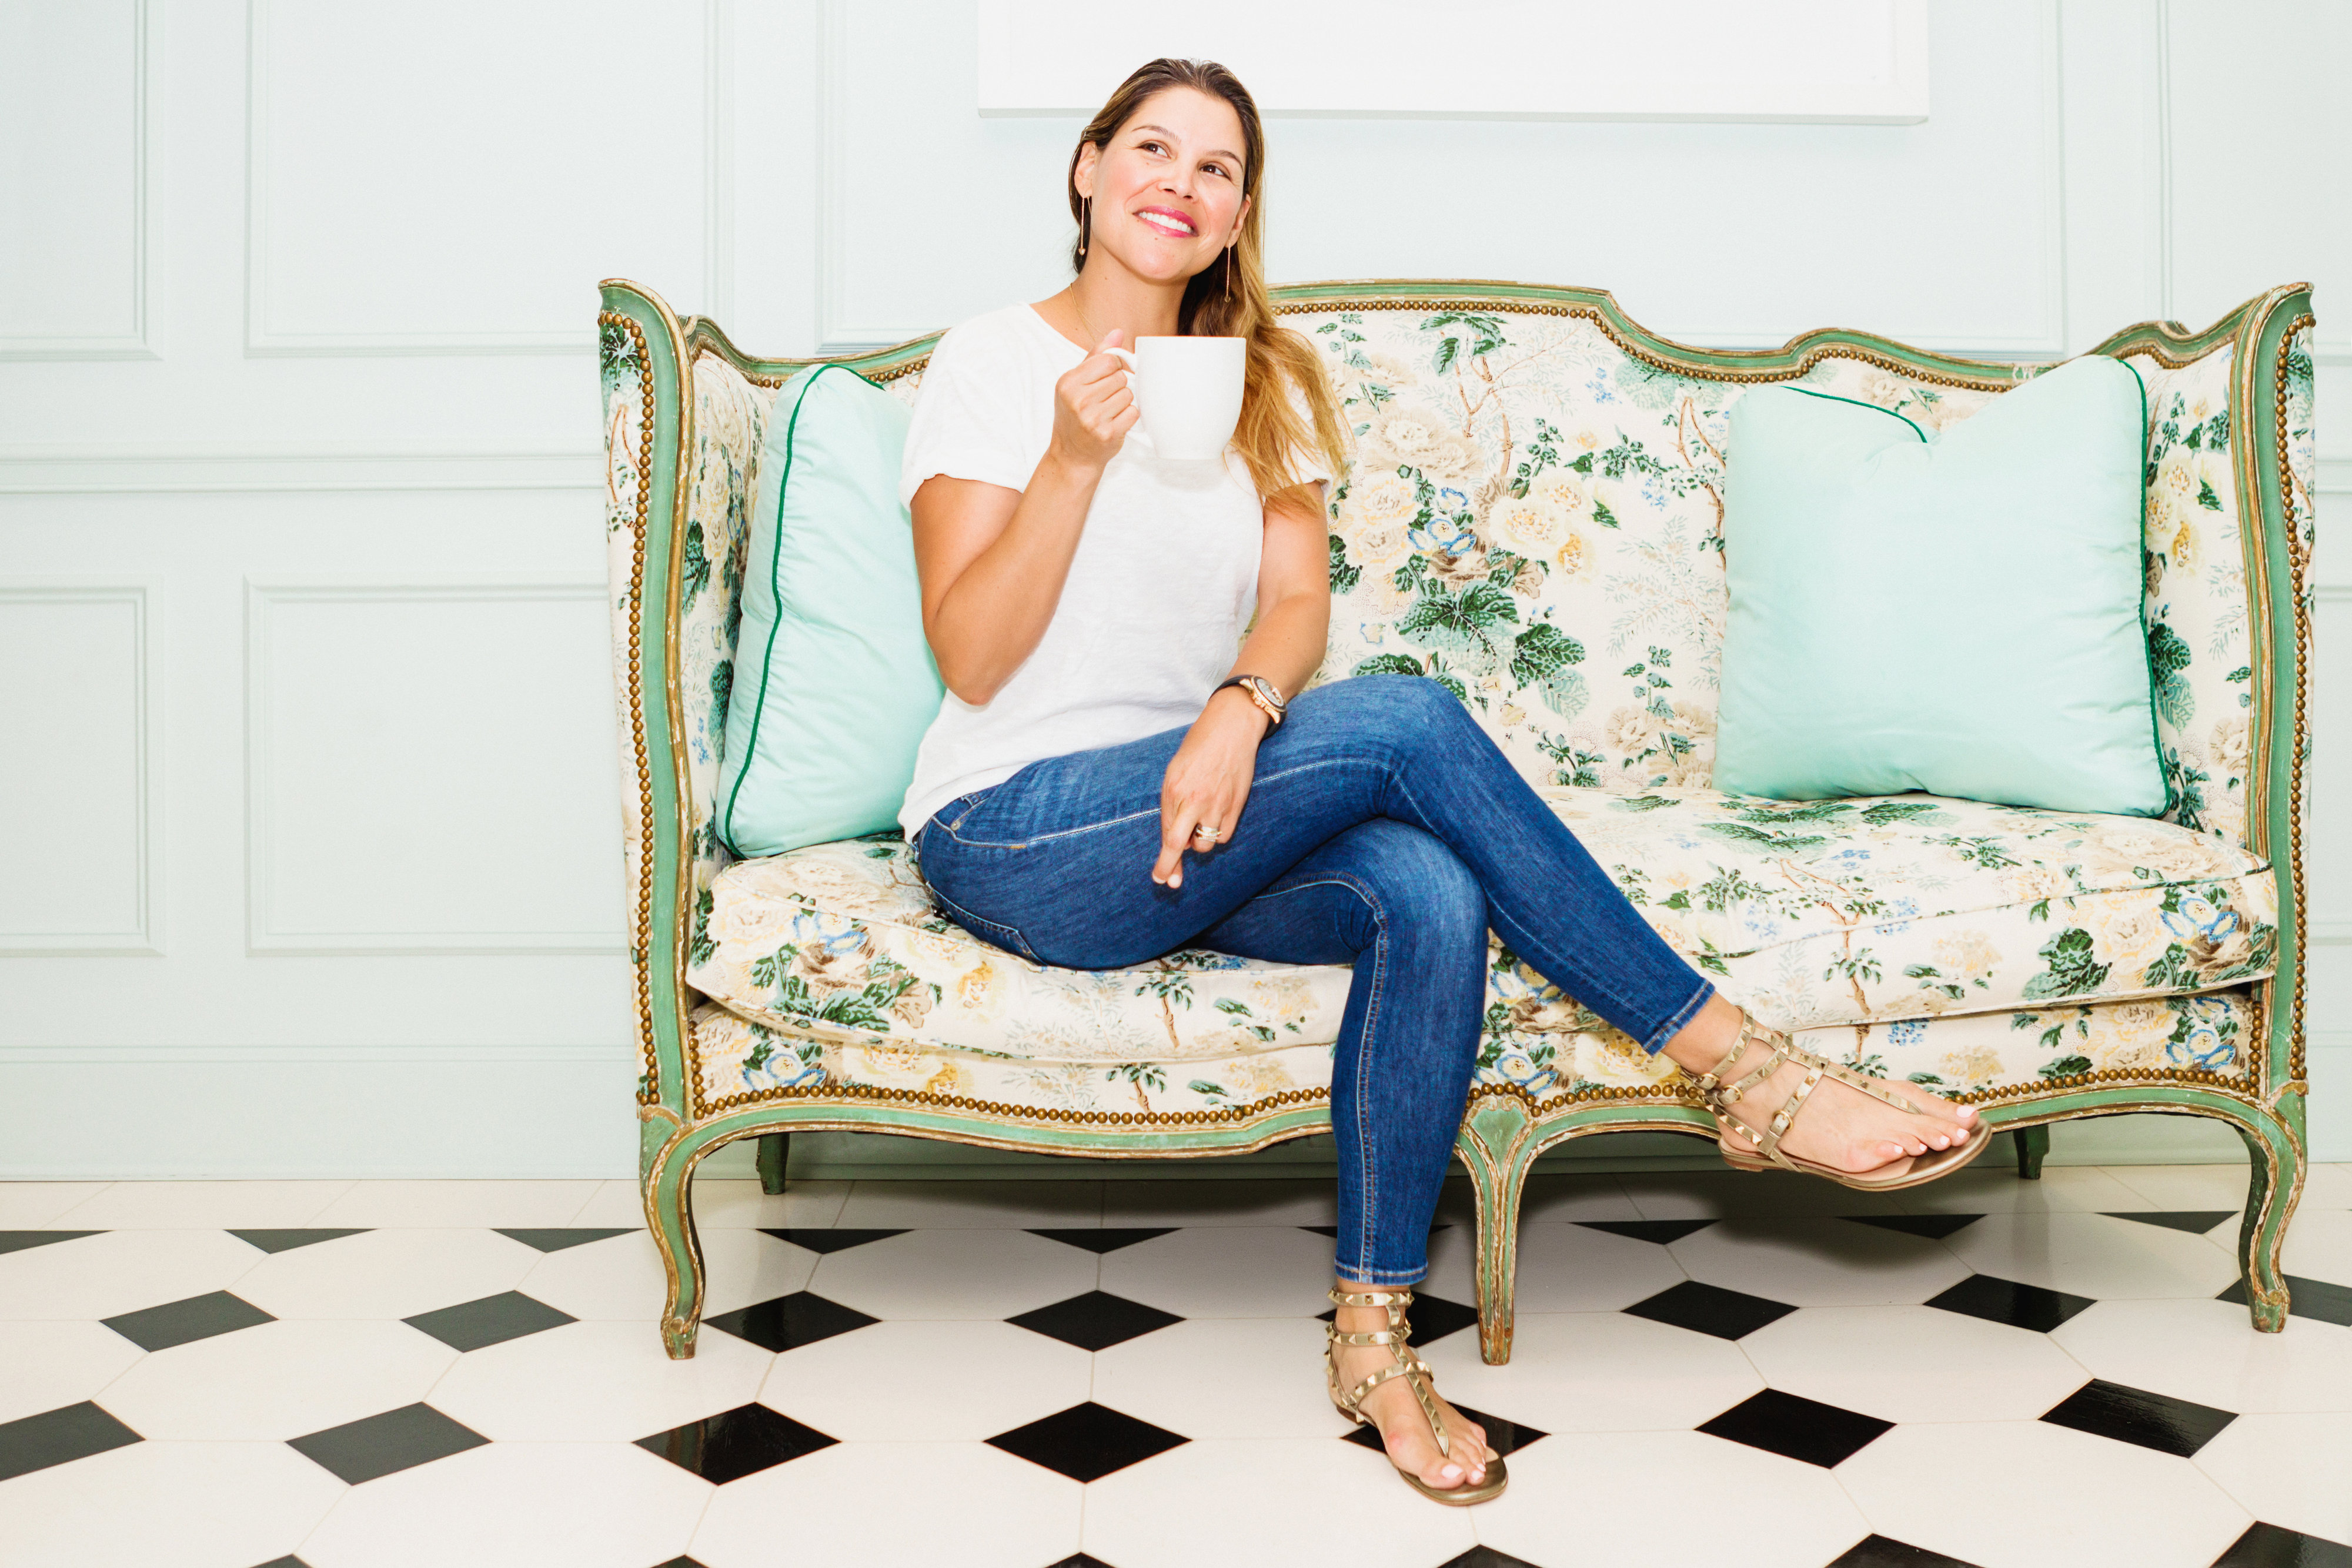 Switch 2 Pure founder Estela on a decorative couch drinking a cup of tea